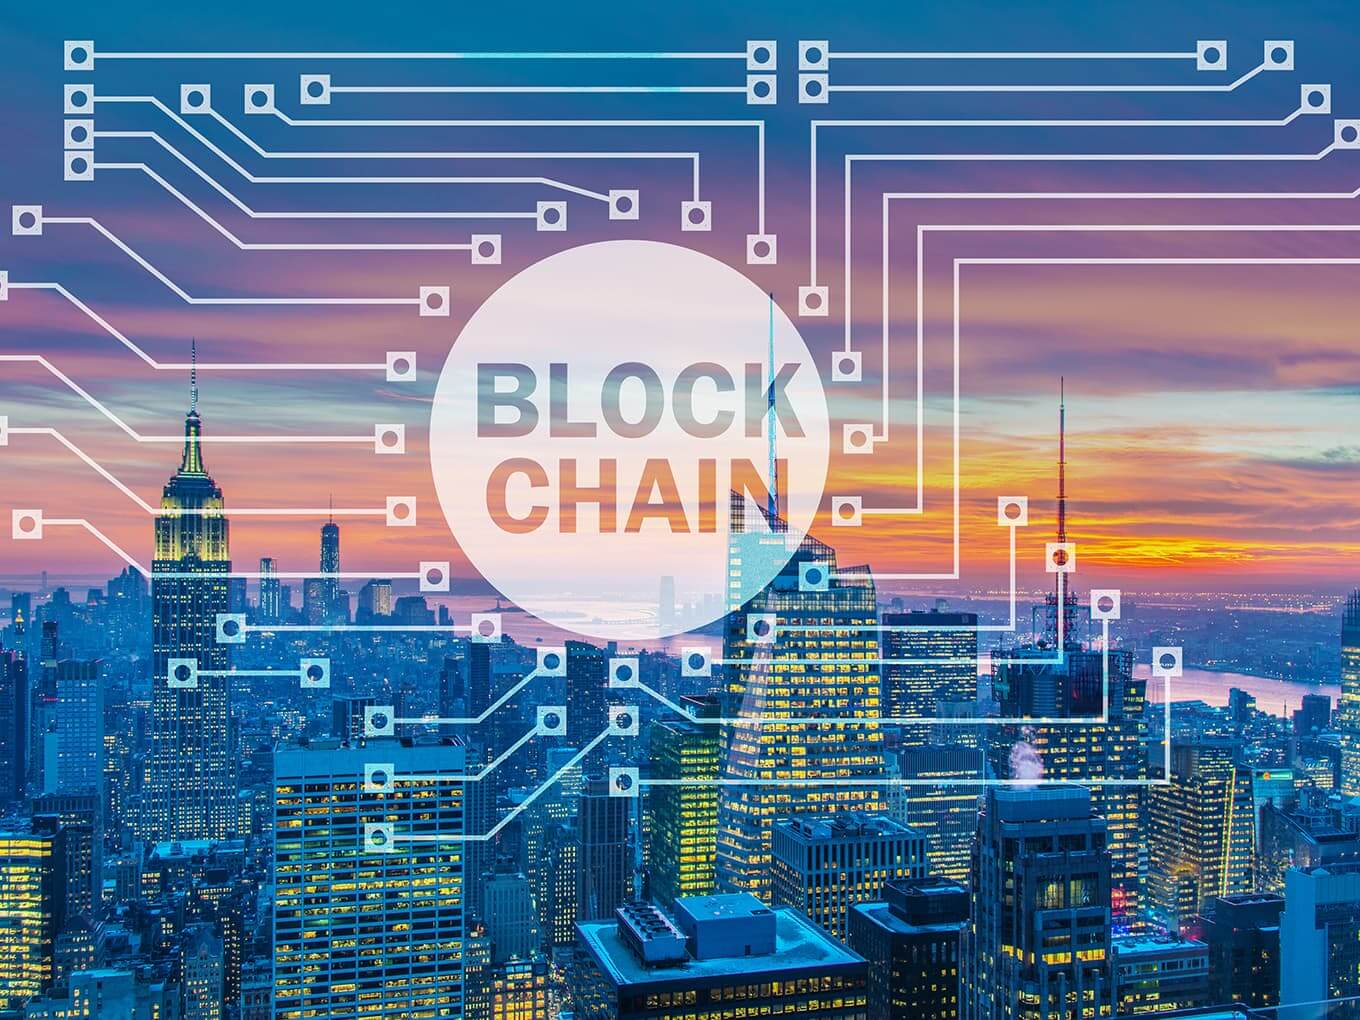 Tech Mahindra To Set Up Blockchain Centre, And More